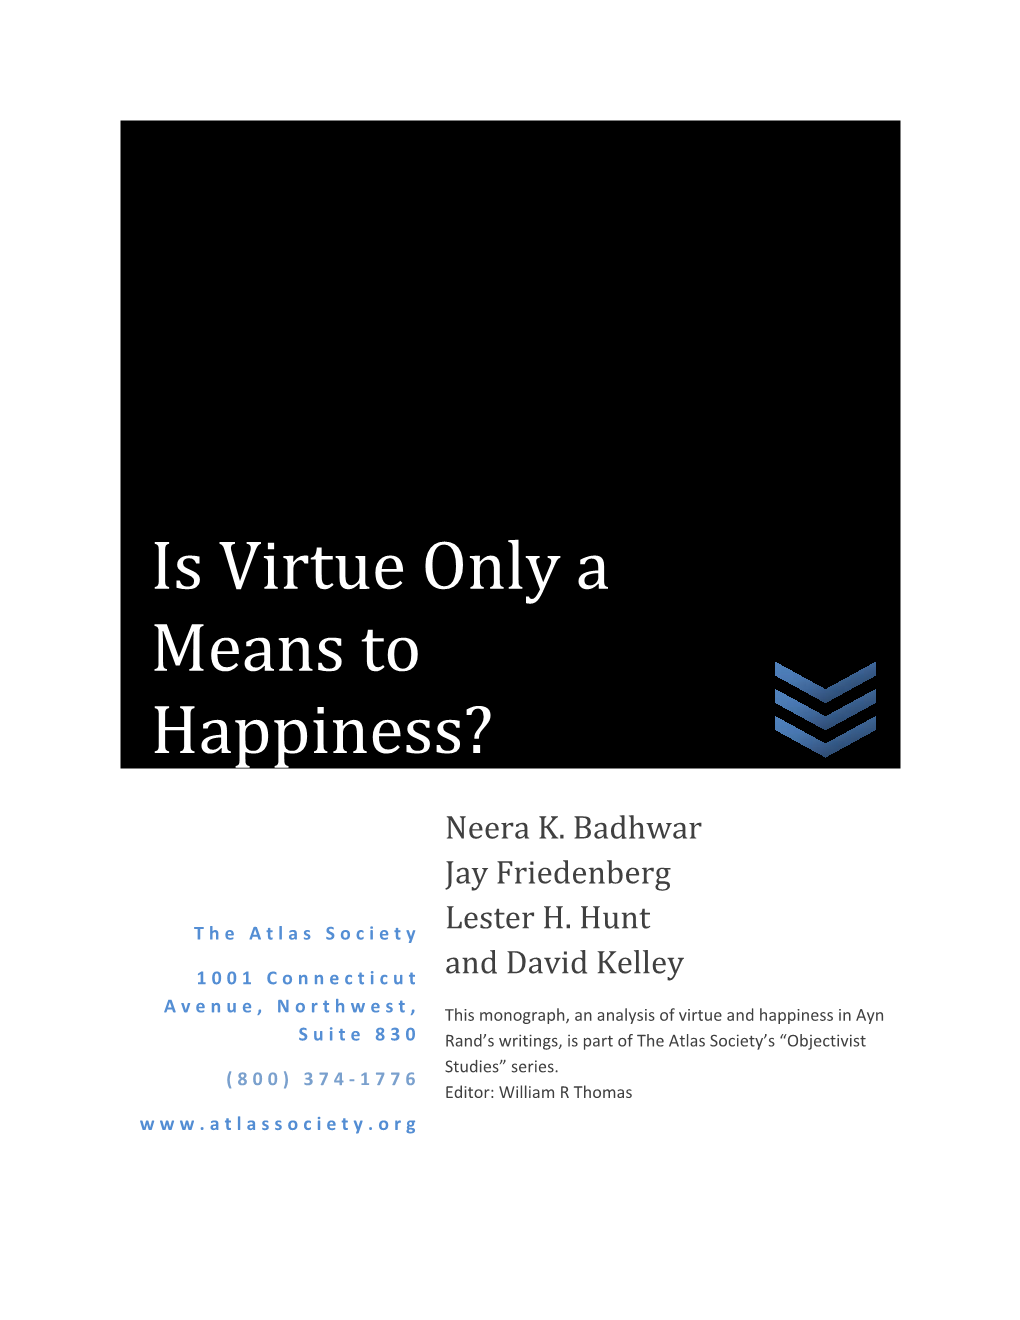 Is Virtue Only a Means to Happiness?